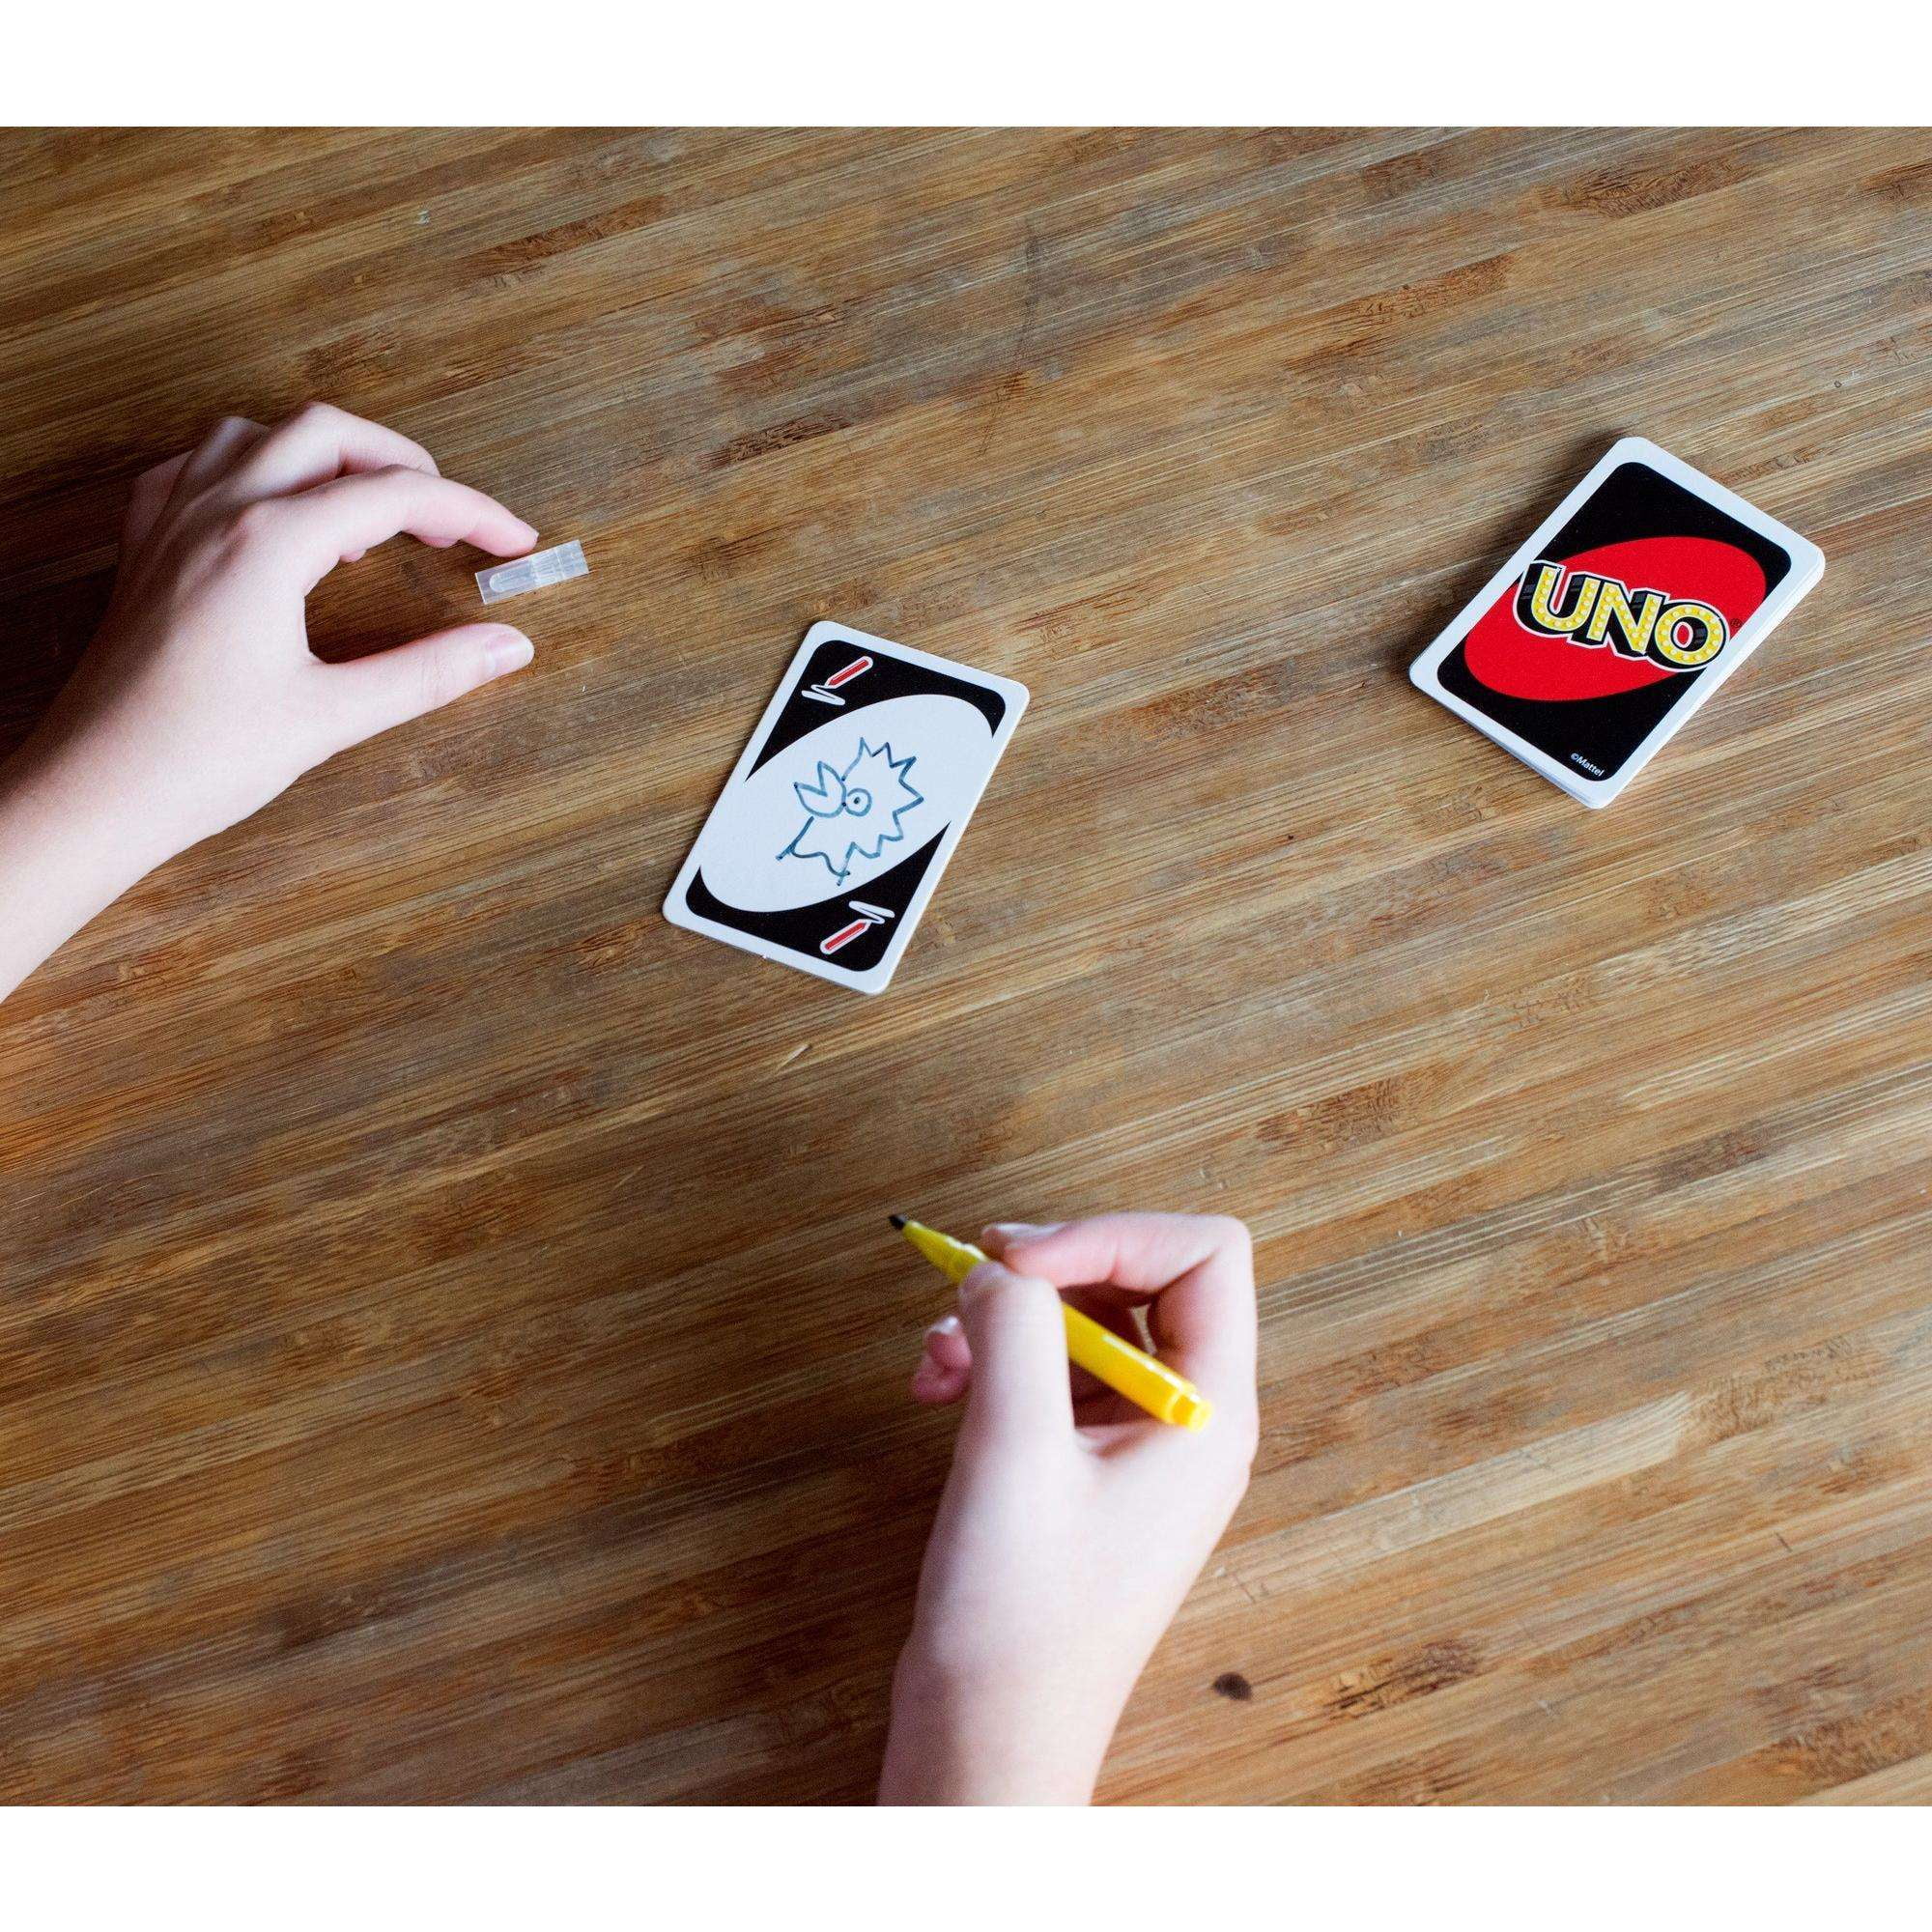 See more ideas about uno cards, cards, uno card game. 